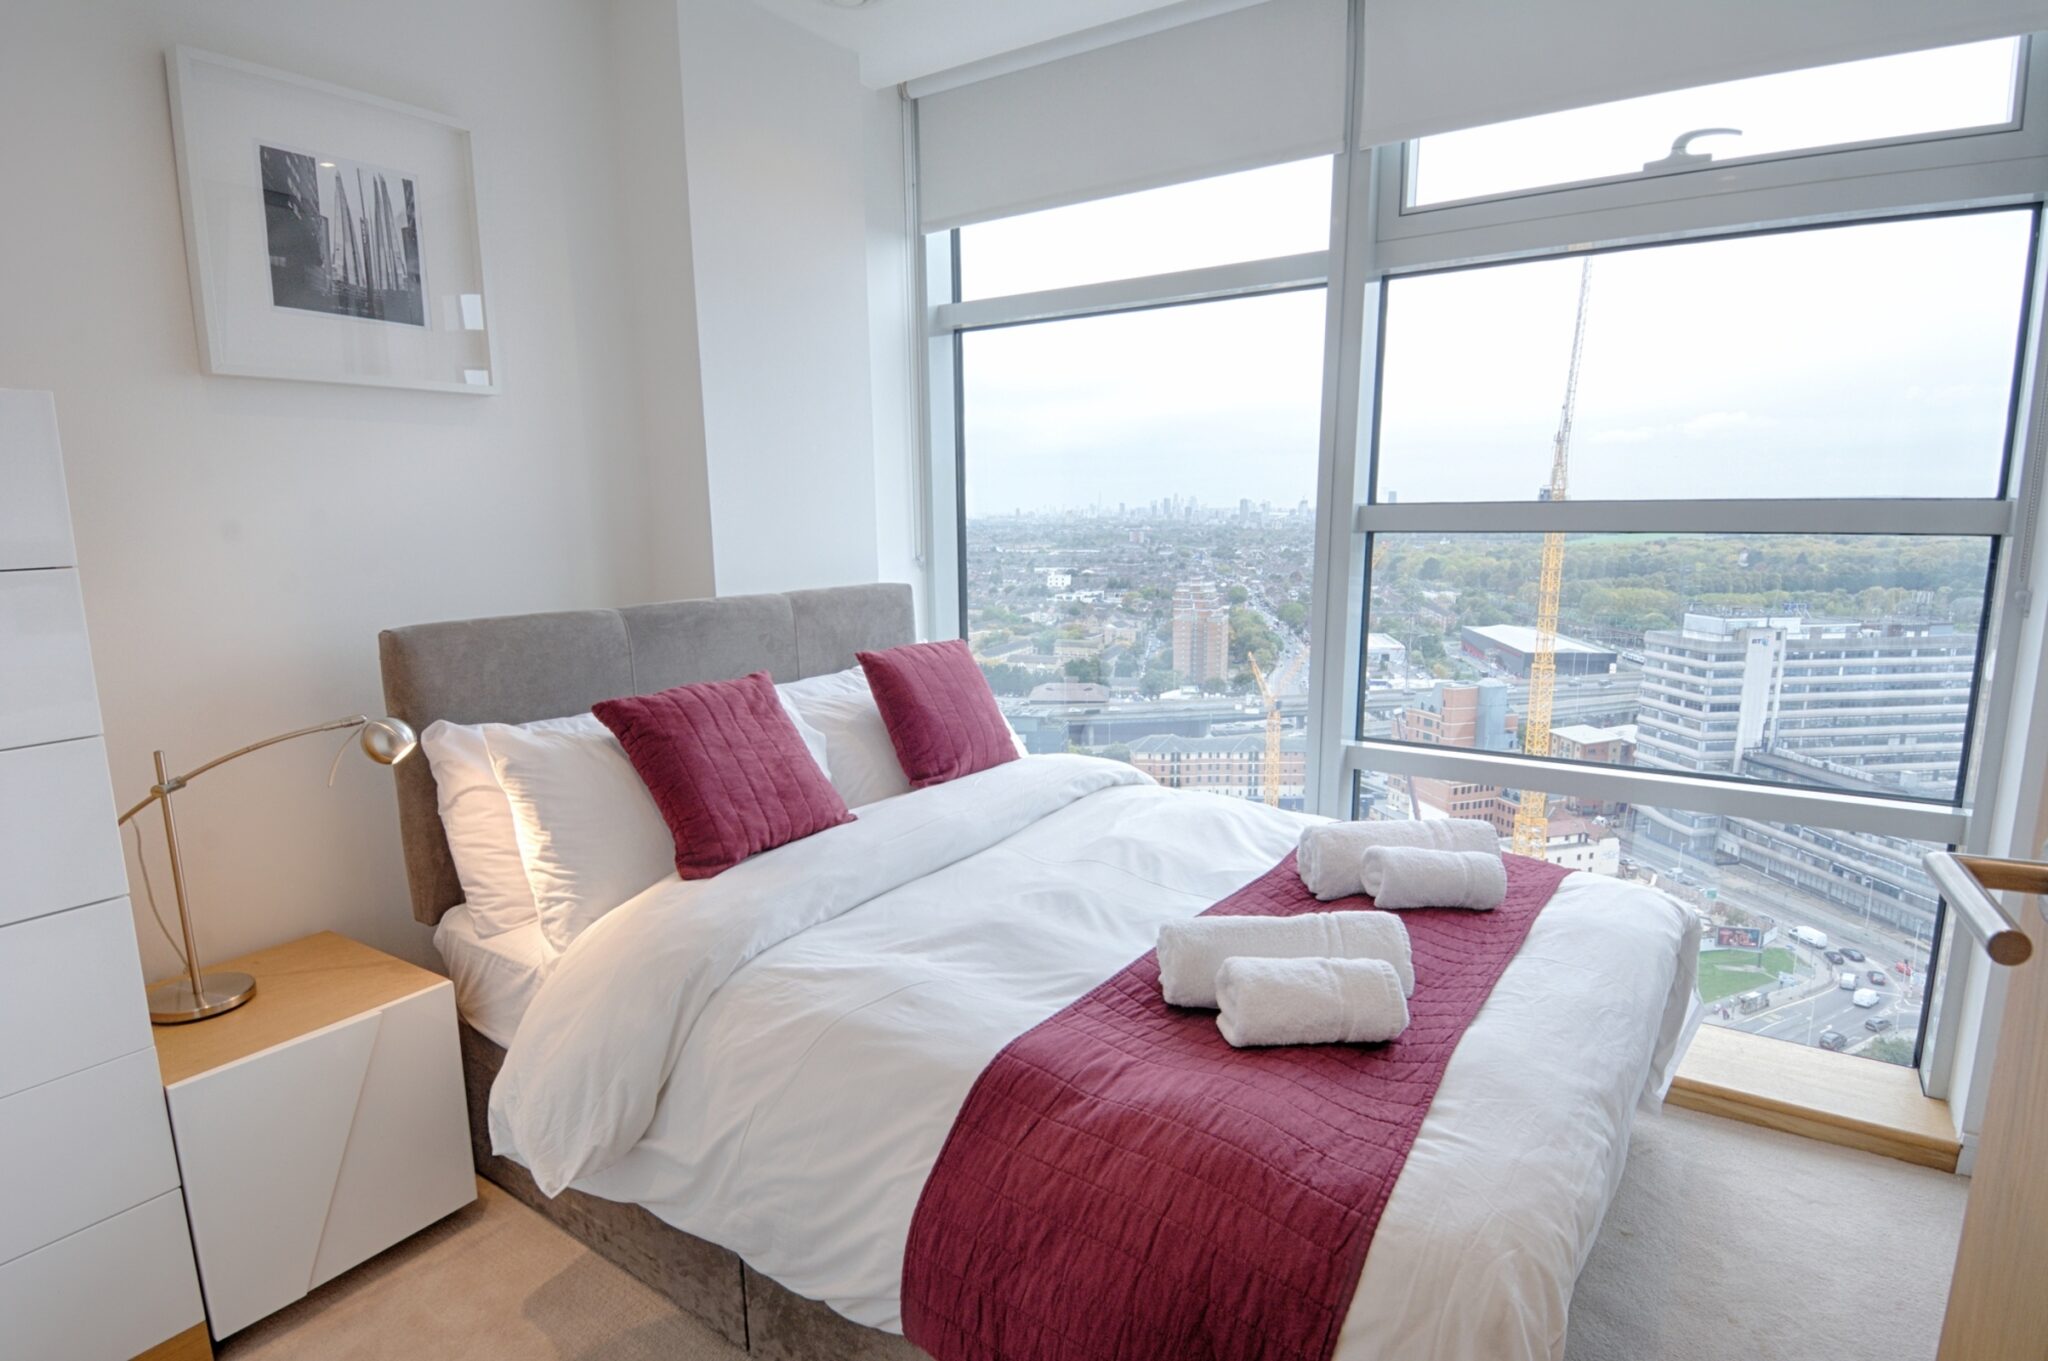 Pioneer Point Apartments - East London Serviced Apartments - London | Urban Stay